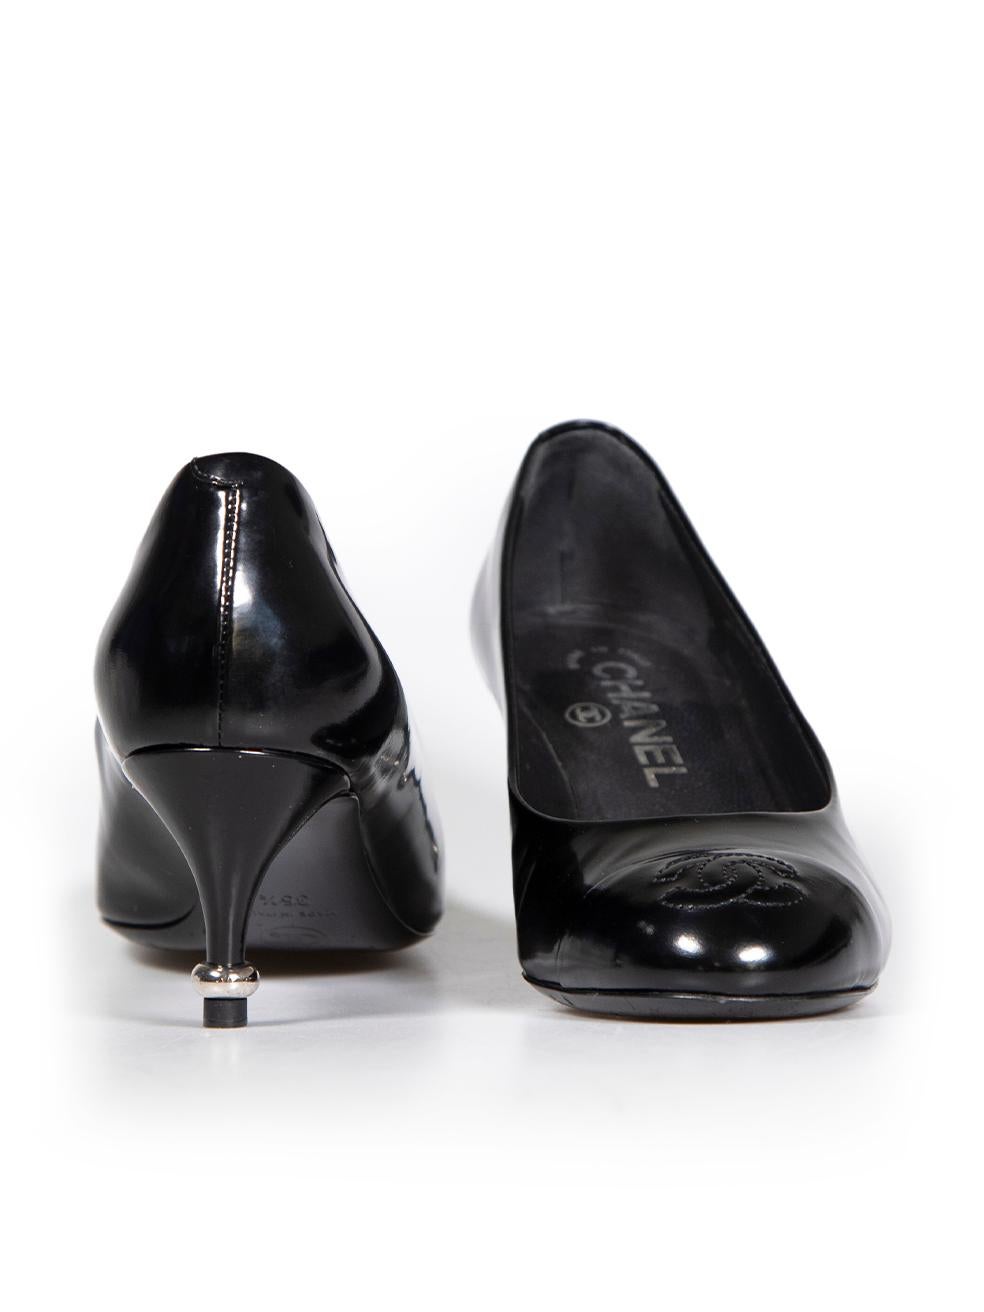 Chanel Black Patent Leather CC Cap-Toe Pumps Size IT 35.5 In Good Condition For Sale In London, GB